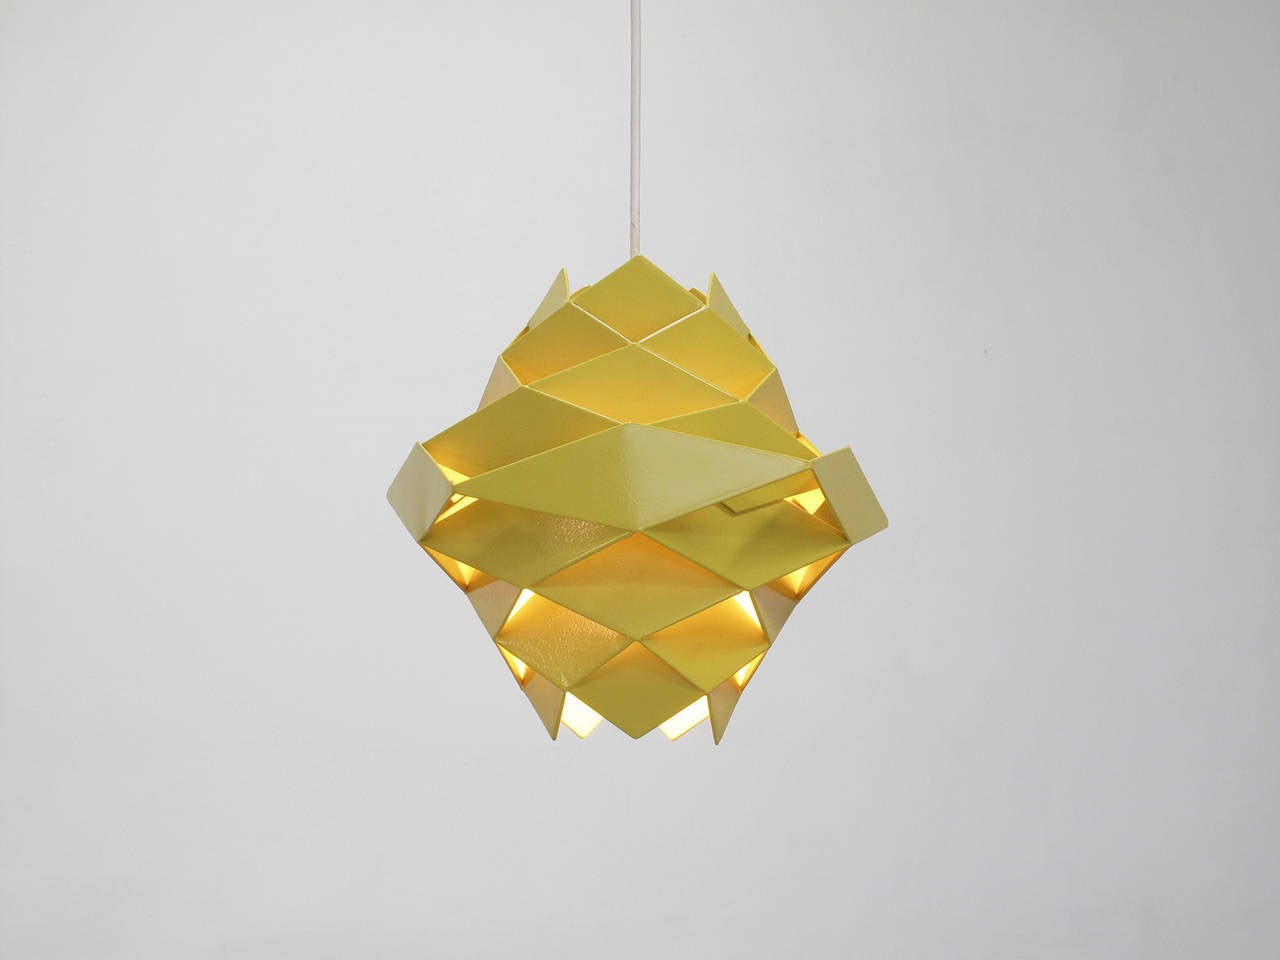 Symfoni collection pendant lamp designed by Preben Dahl and made by Hans Følsgaard, Denmark, 1960s.